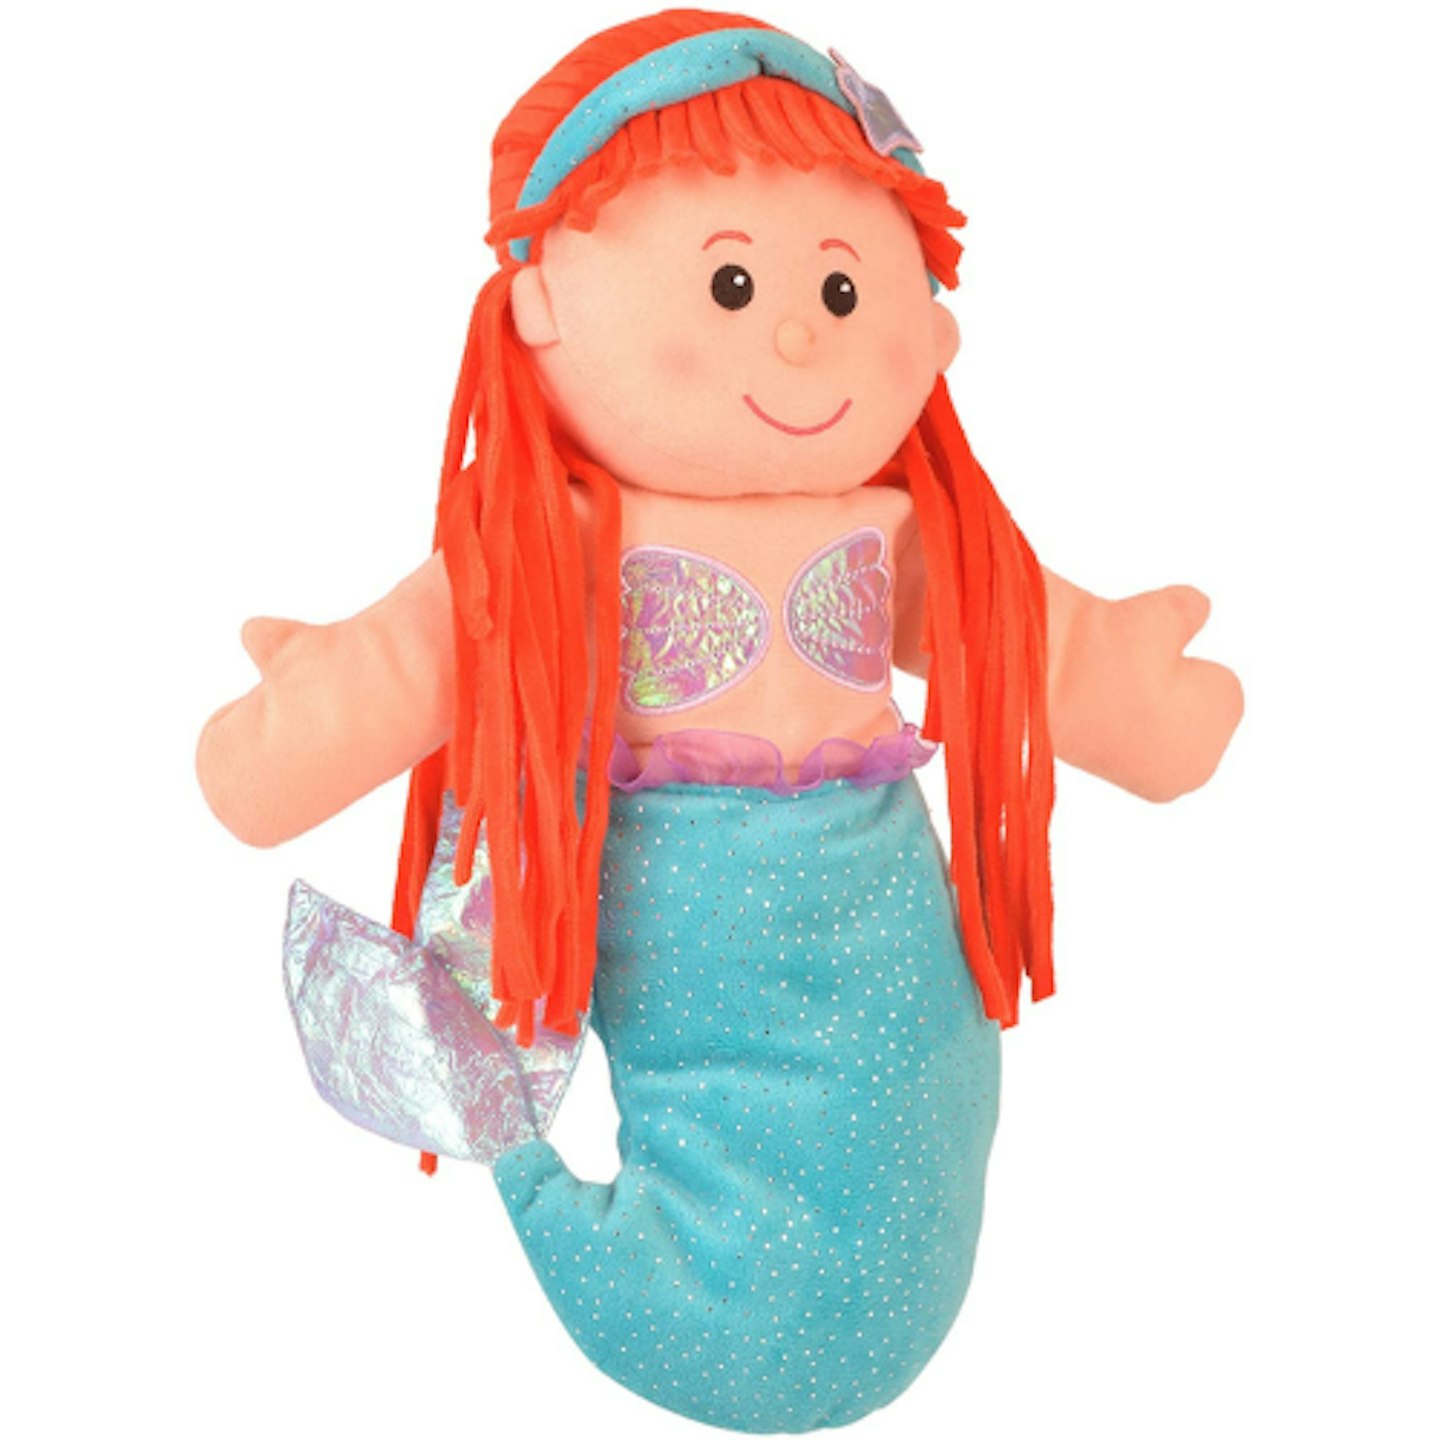 Fiesta Crafts Little Mermaid Hand and Finger Puppets Set